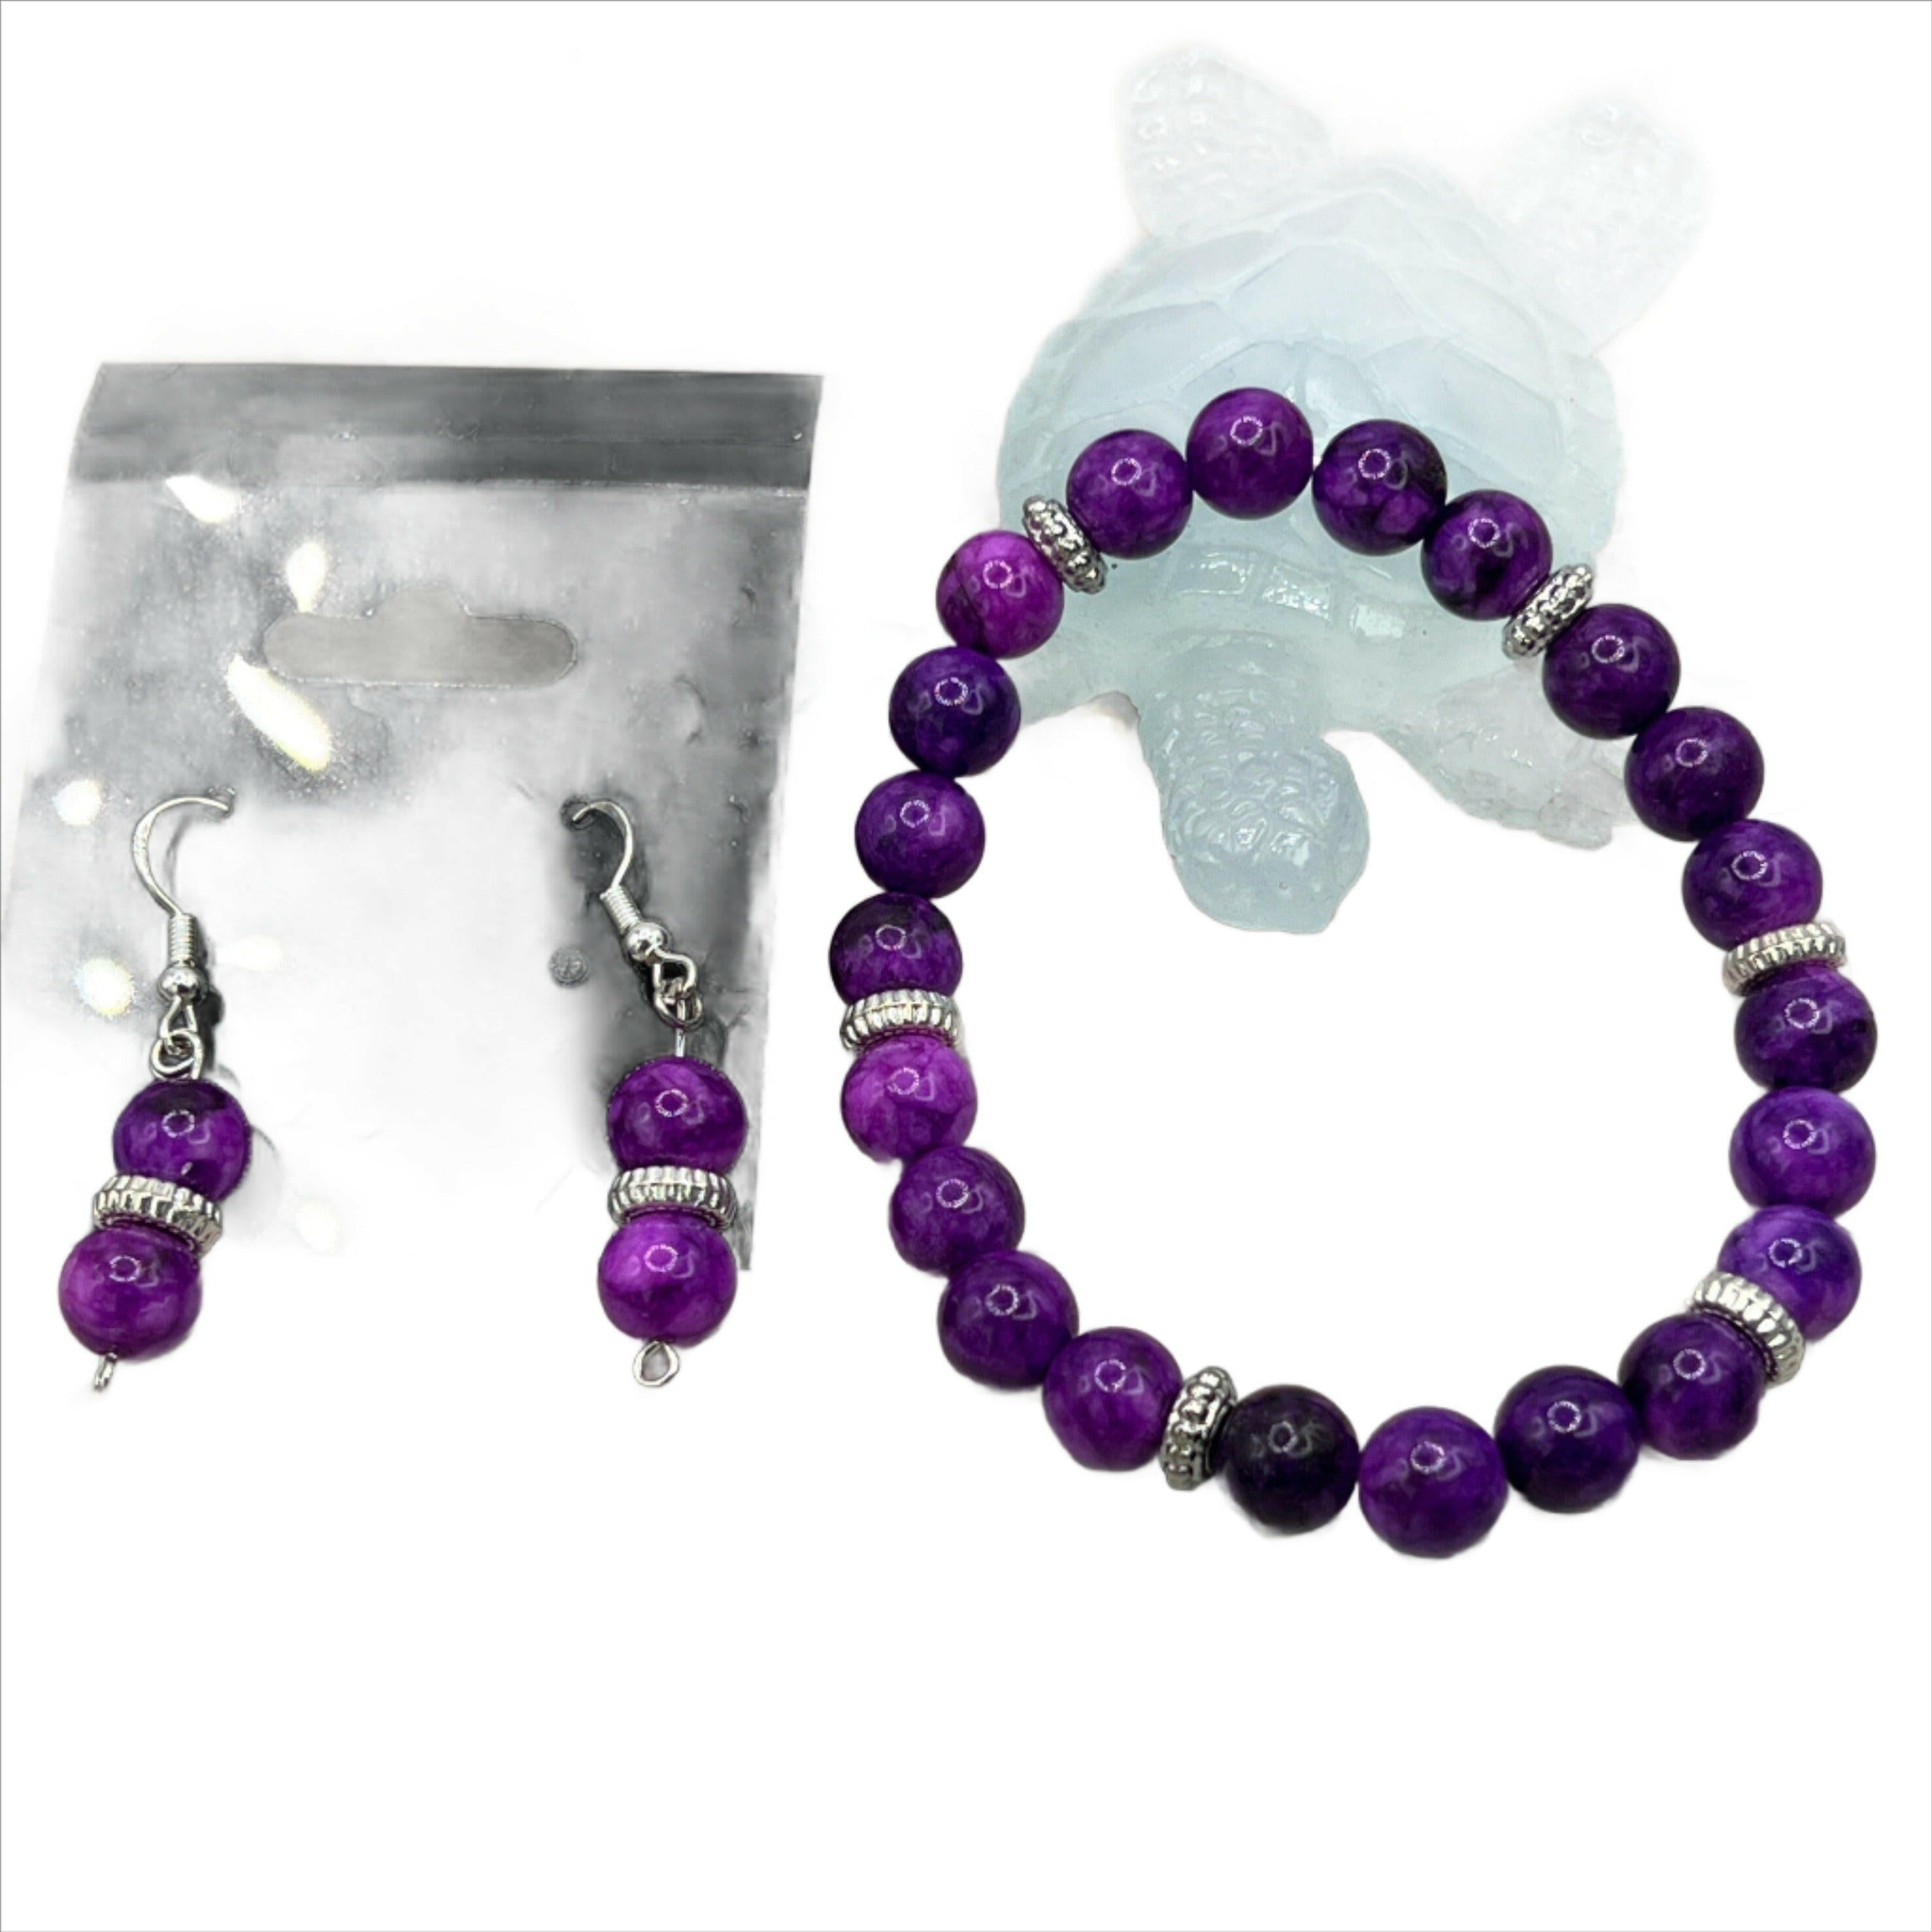 Bec Sue Jewelry Shop bracelets and earrings 6.5 / sugilite/silver spacers / purple Sugilite Jewelry Set: Handcrafted Sugilite 8mm Bead Bracelet, Earrings and Necklace Tags 629